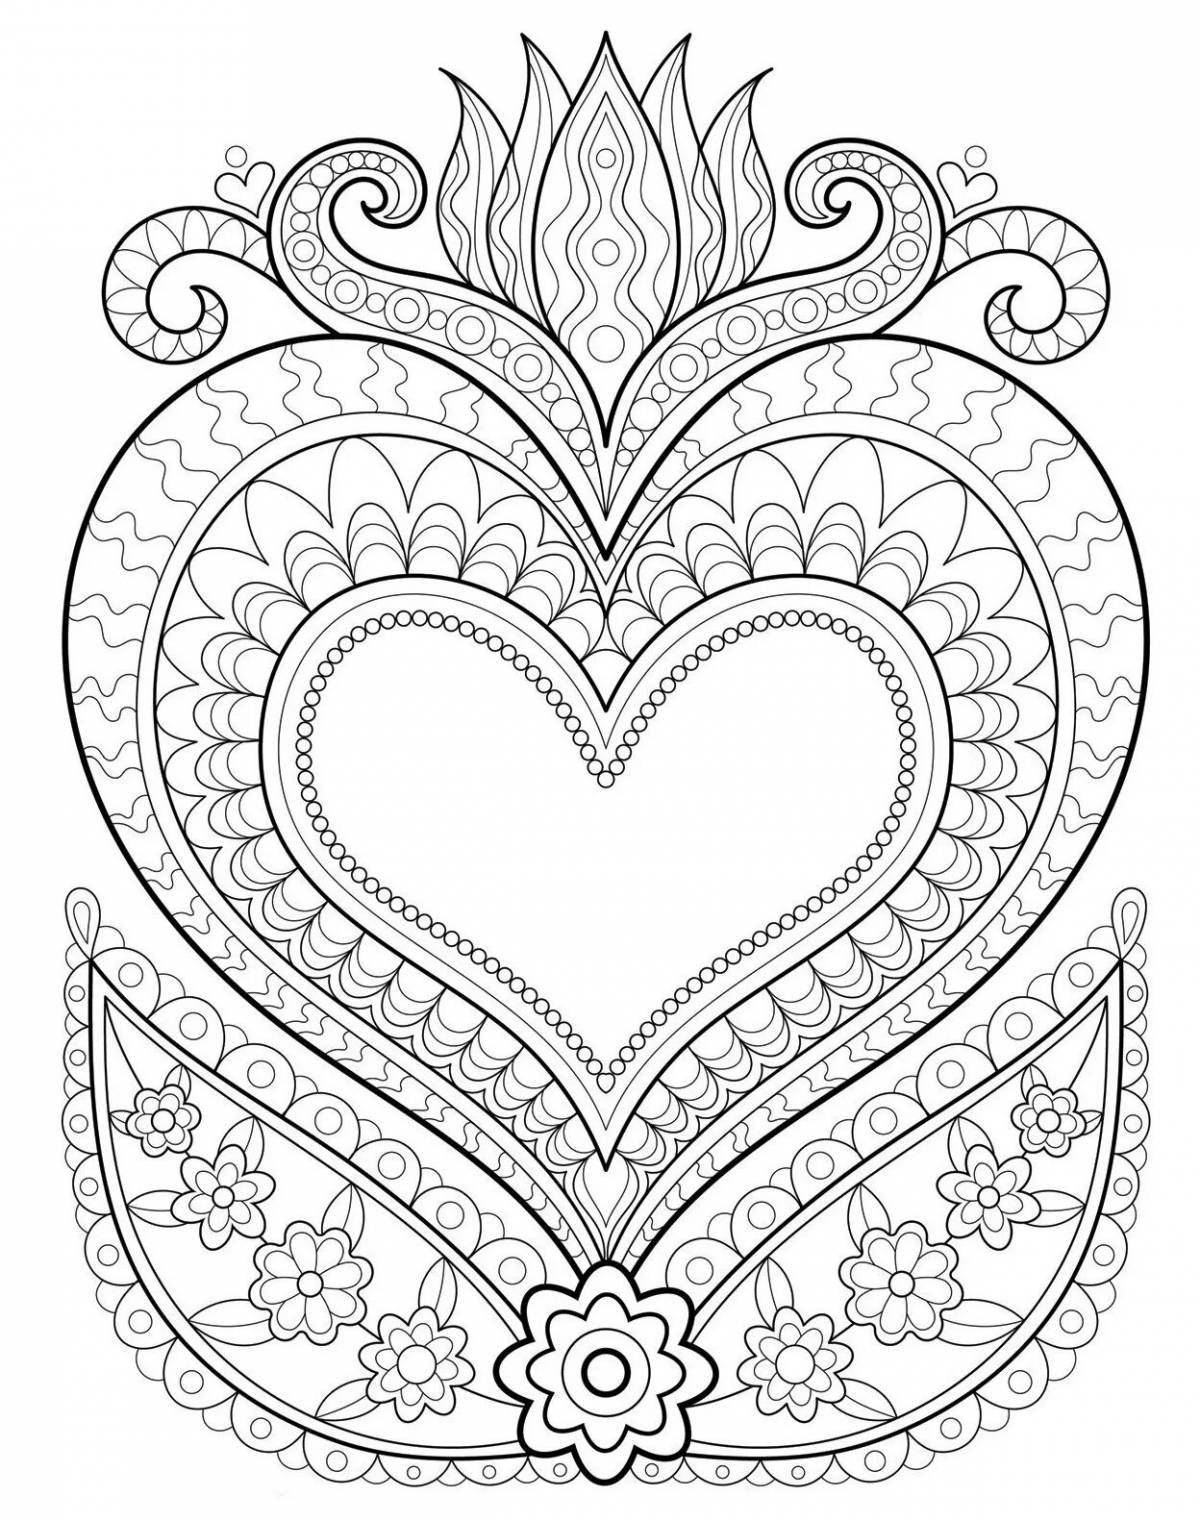 Coloring glowing heart antistress